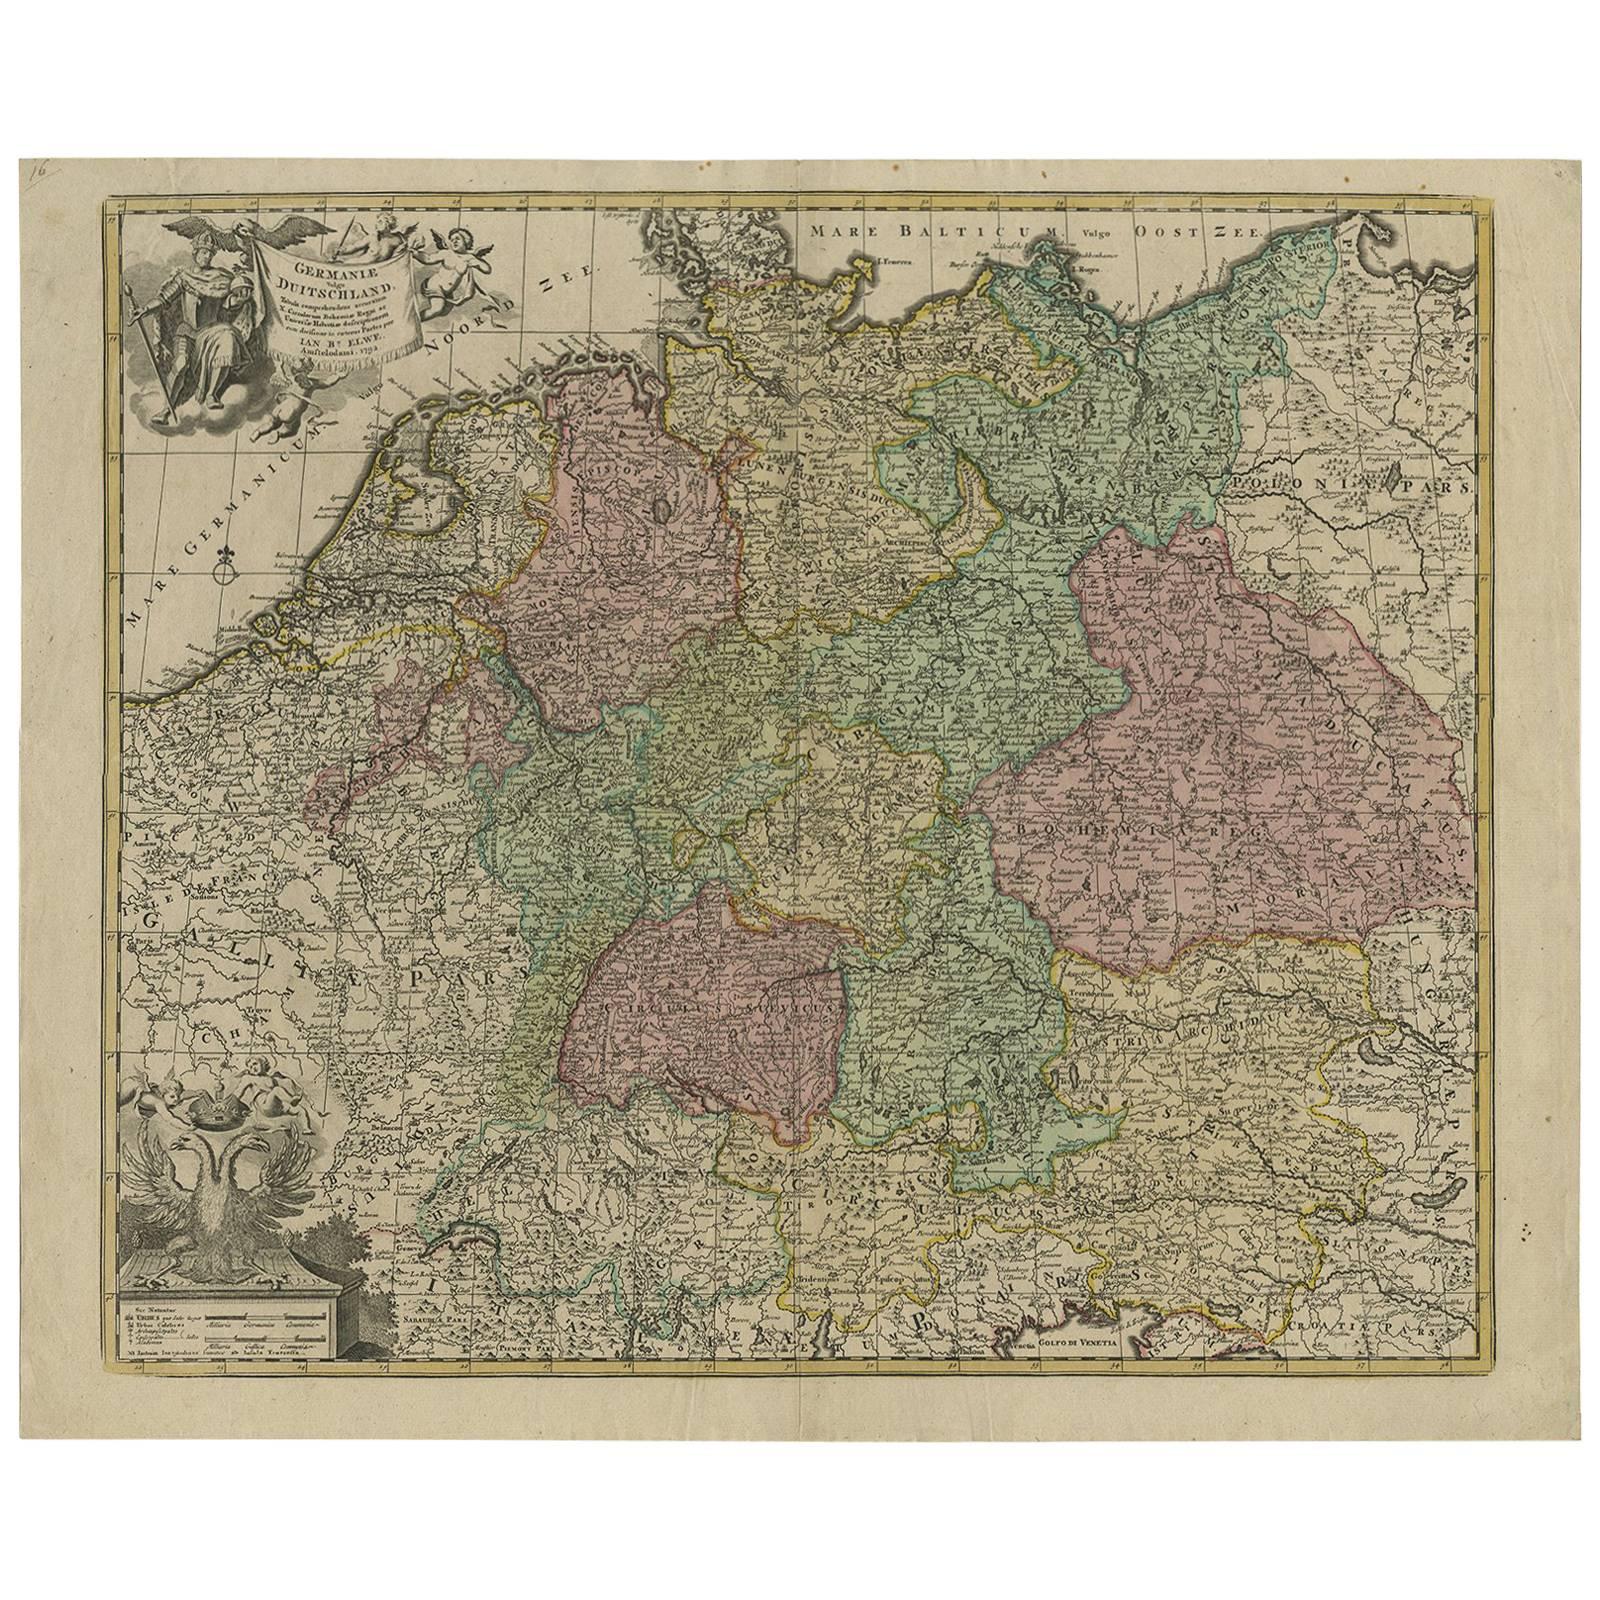 Antique Map of Germany by J.B. Elwe, 1792